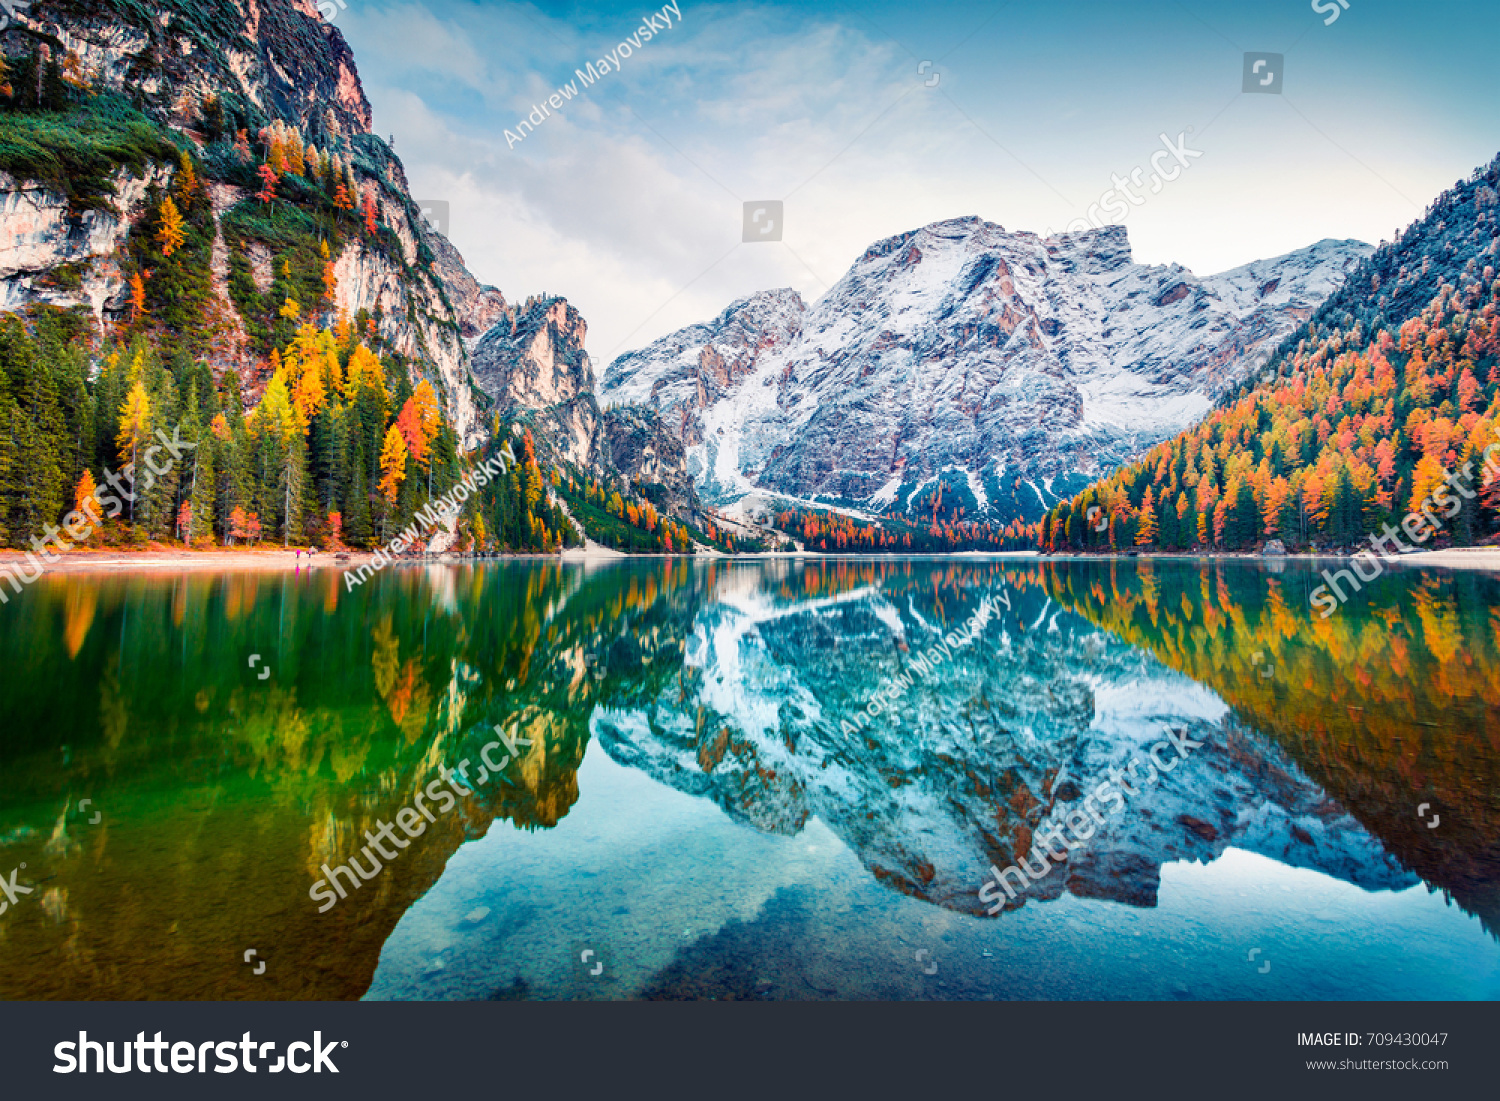 First snow on Braies Lake. Colorful autumn landscape in Italian Alps, Naturpark Fanes-Sennes-Prags, Dolomite, Italy, Europe. Beauty of nature concept background.  #709430047